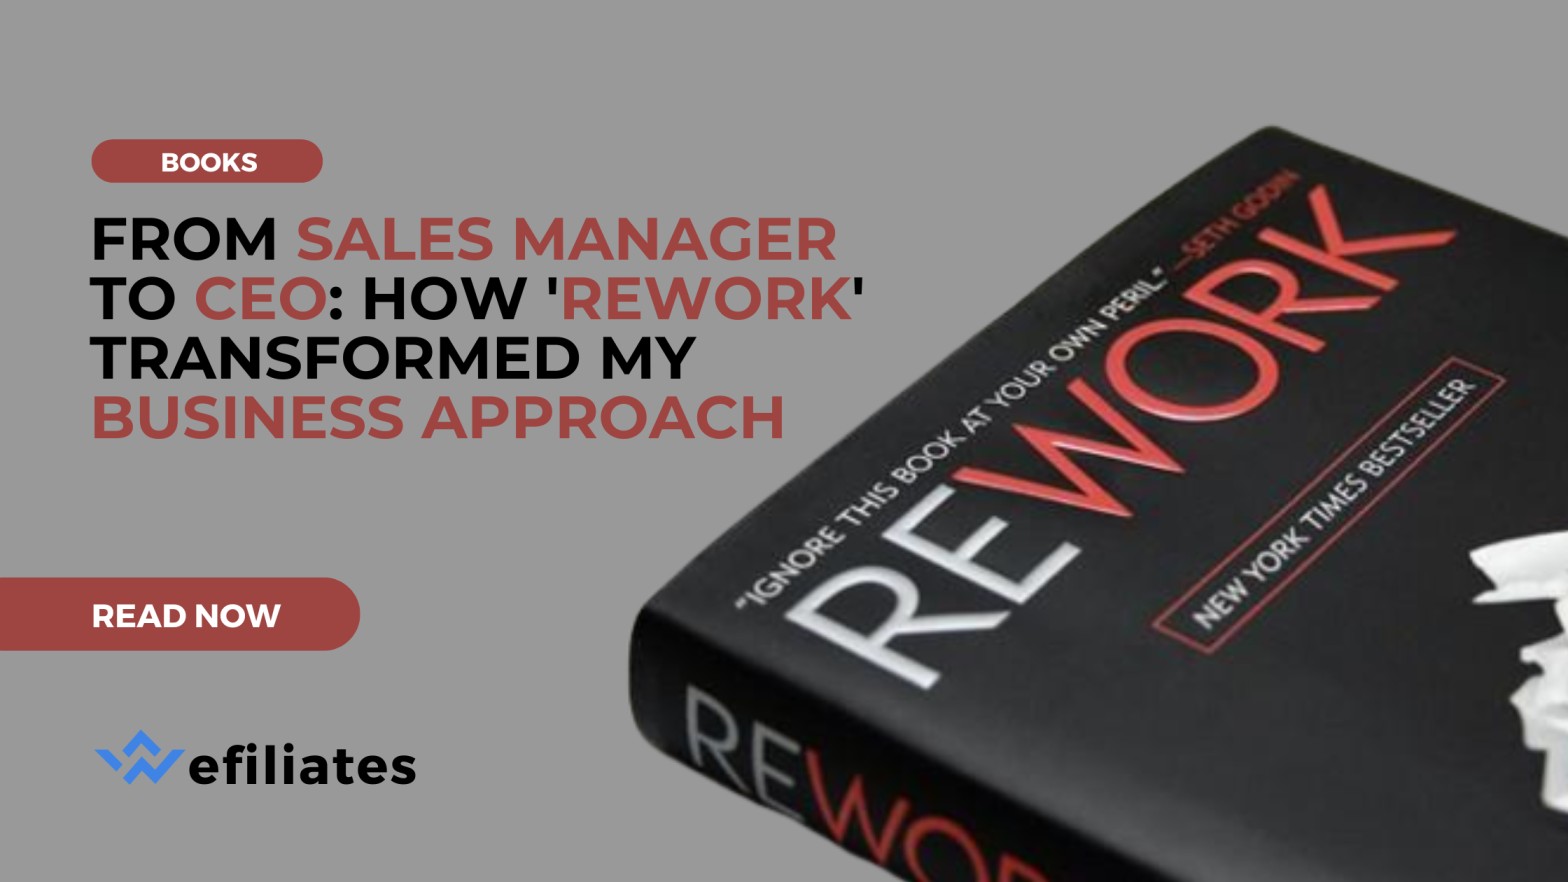 From Sales Manager to CEO: How ‘Rework’ Transformed My Business Approach